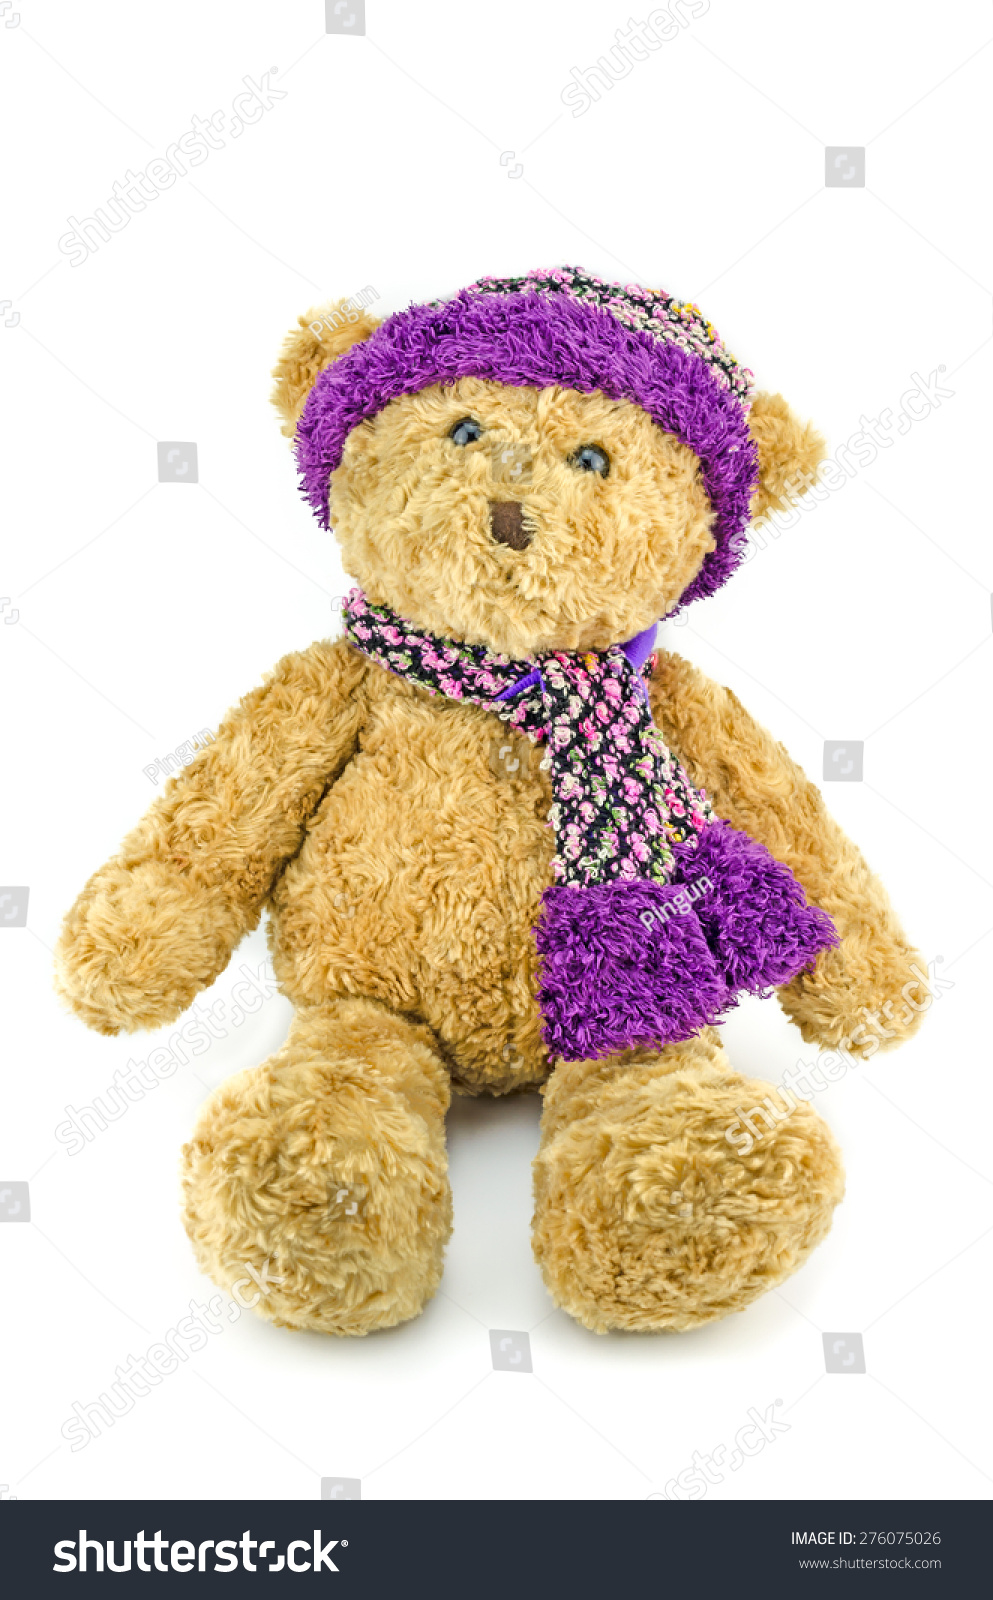 teddy bear with hat and scarf